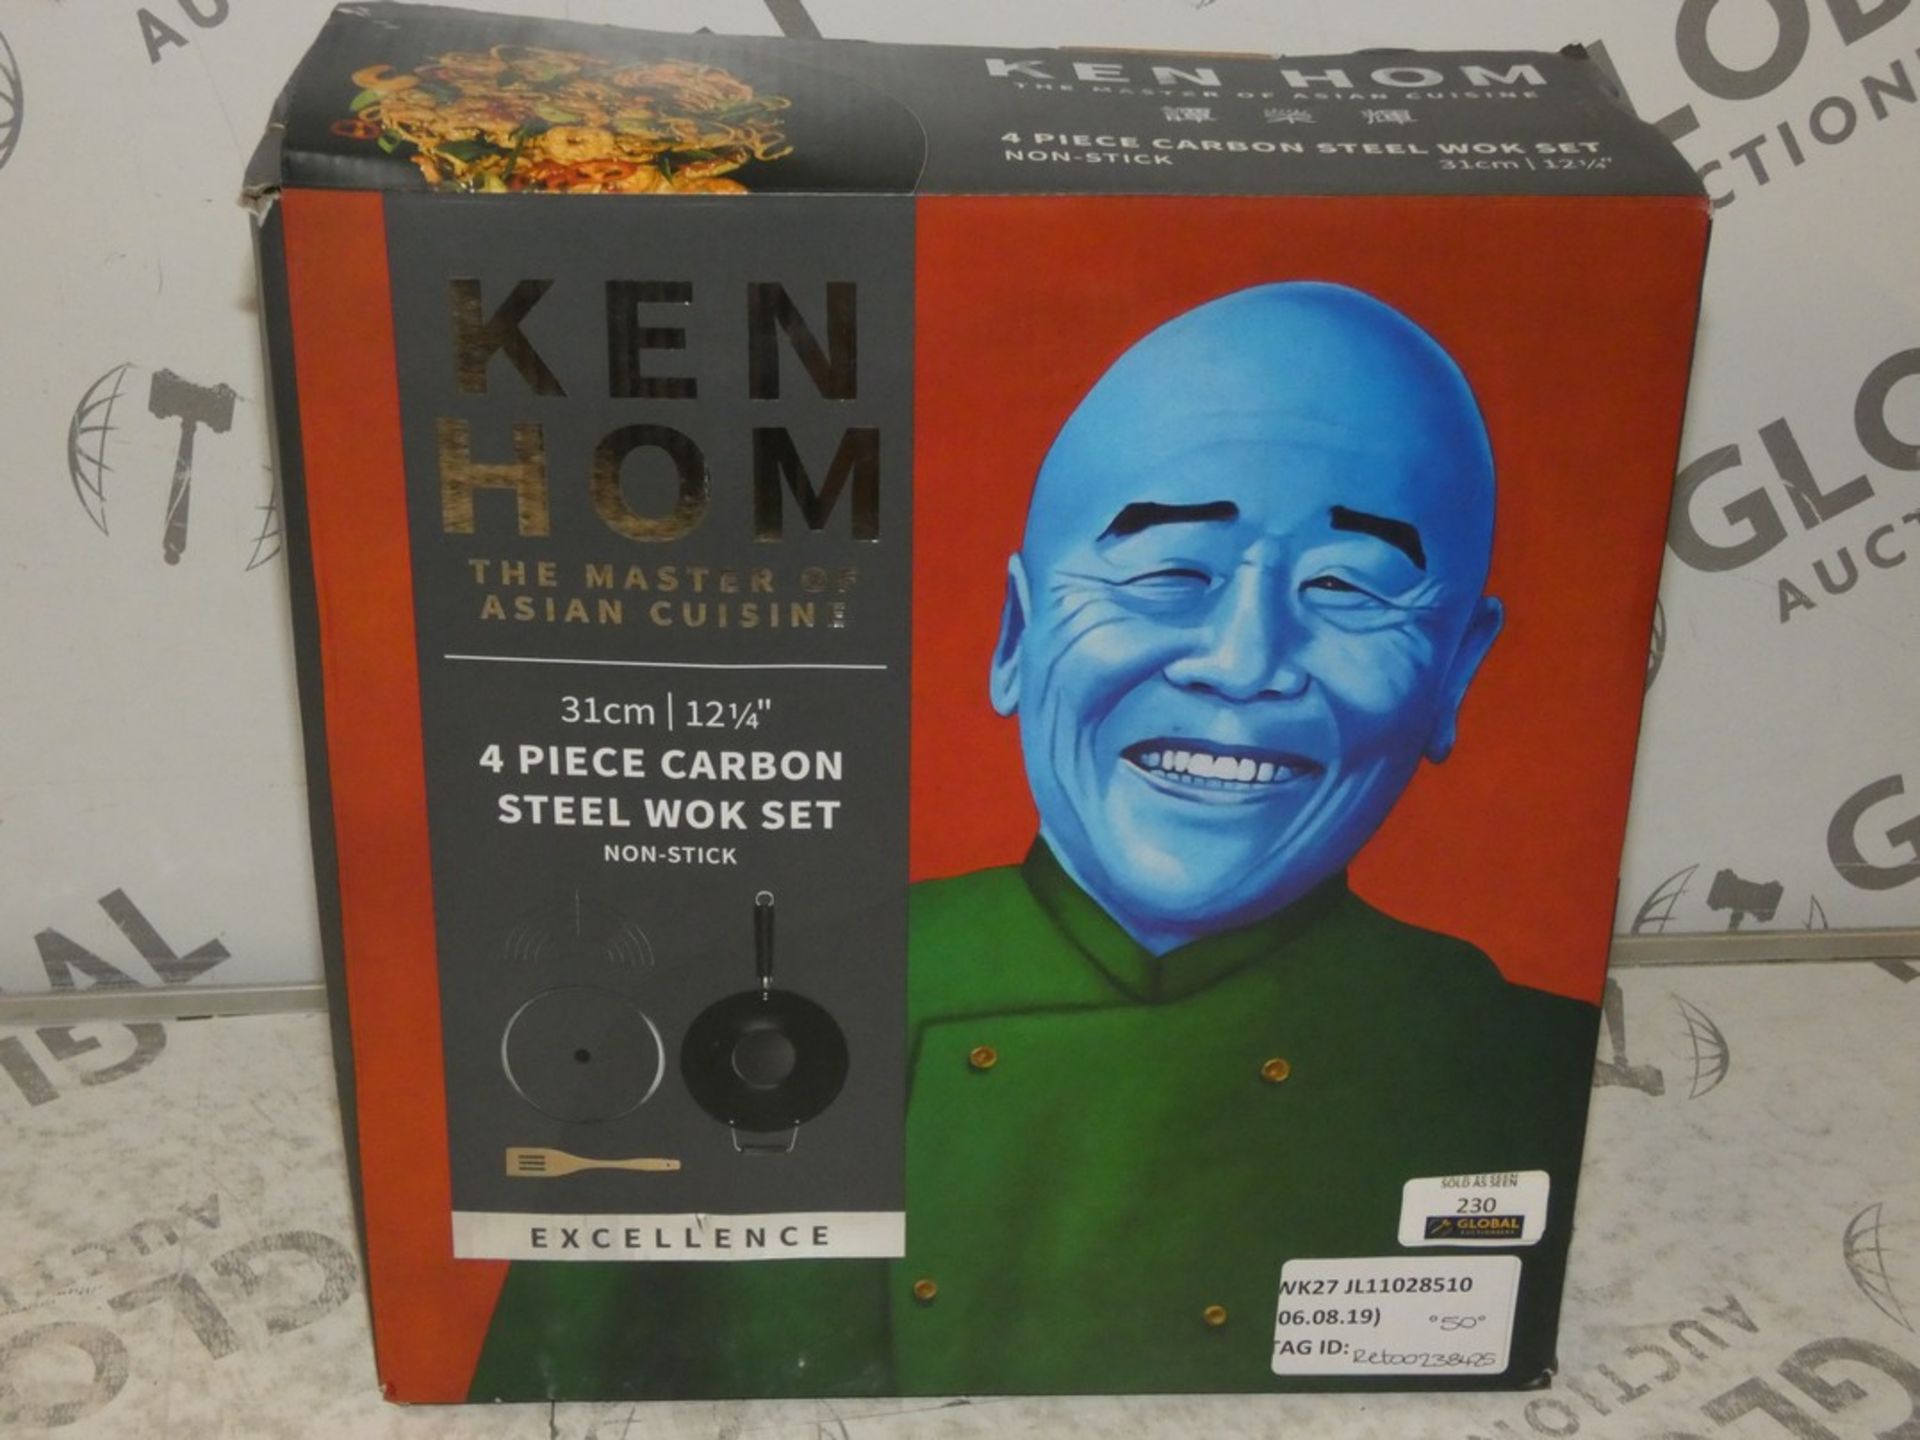 Boxed Kenhom 31cm 4 Piece Carbon Steel Wok Set RRP £50 (RET00238425) (Viewing or Appraisals Highly